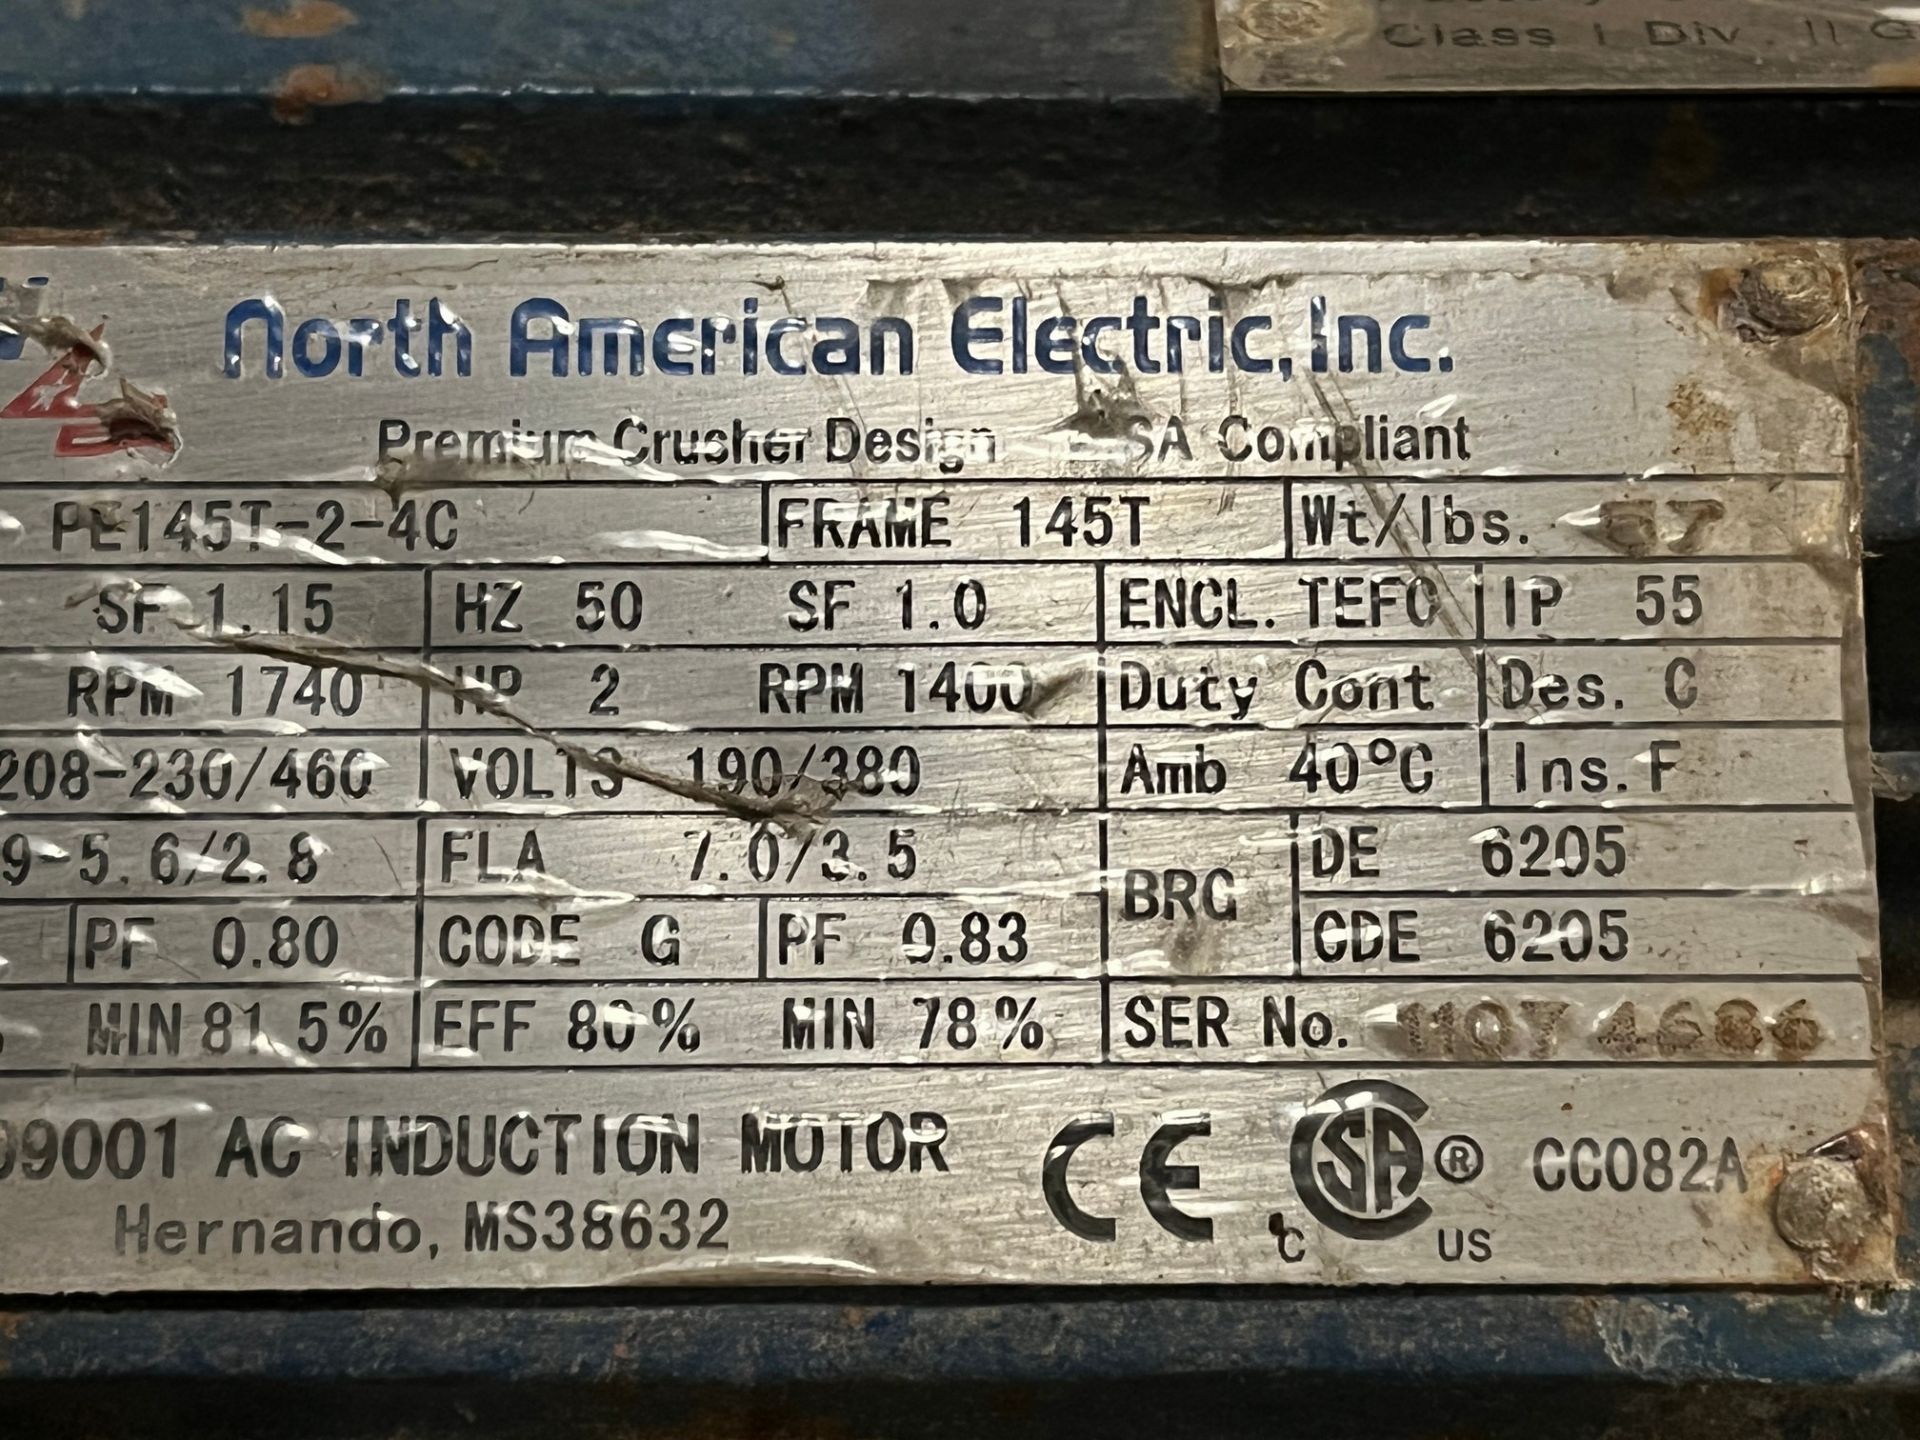 LOT OF (3) NORTH AMERICAN ELECTRIC MOTORS, (2) 2HP, (1) 1HP, 1,740 / 3,500 RPM, 208-230/460V, - Image 4 of 4